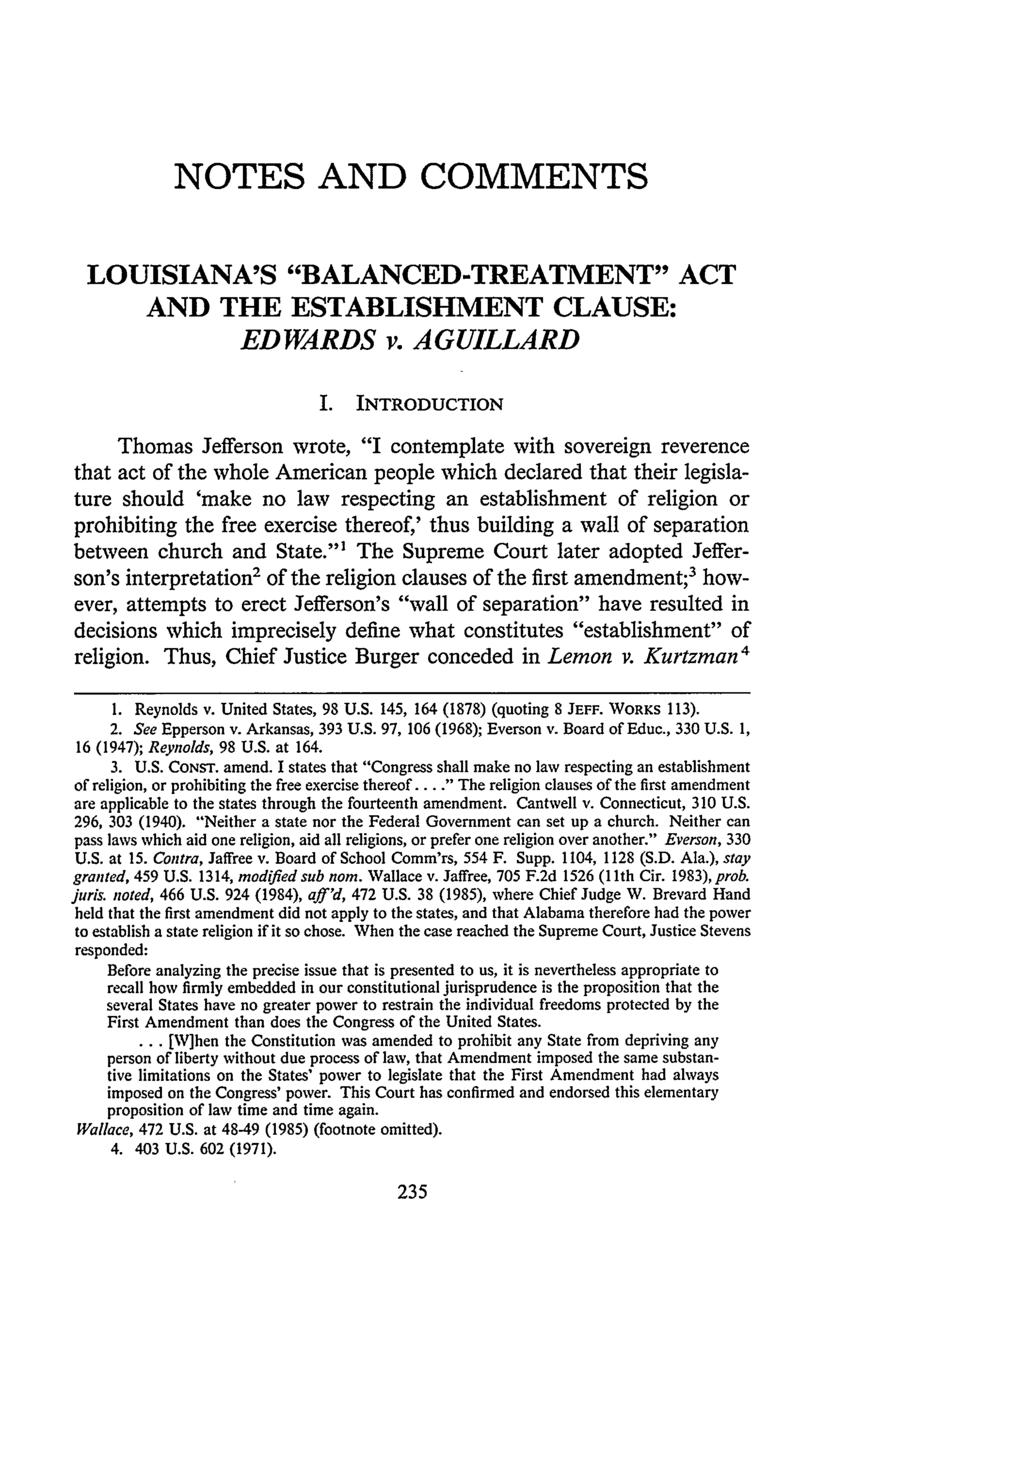 Schimmelpfennig: Louisiana's Balanced-Treatment Act and the Establishment Clause: NOTES AND COMMENTS LOUISIANA'S "BALANCED-TREATMENT" ACT AND THE ESTABLISHMENT CLAUSE: EDWARDS v. AGUILLARD I.